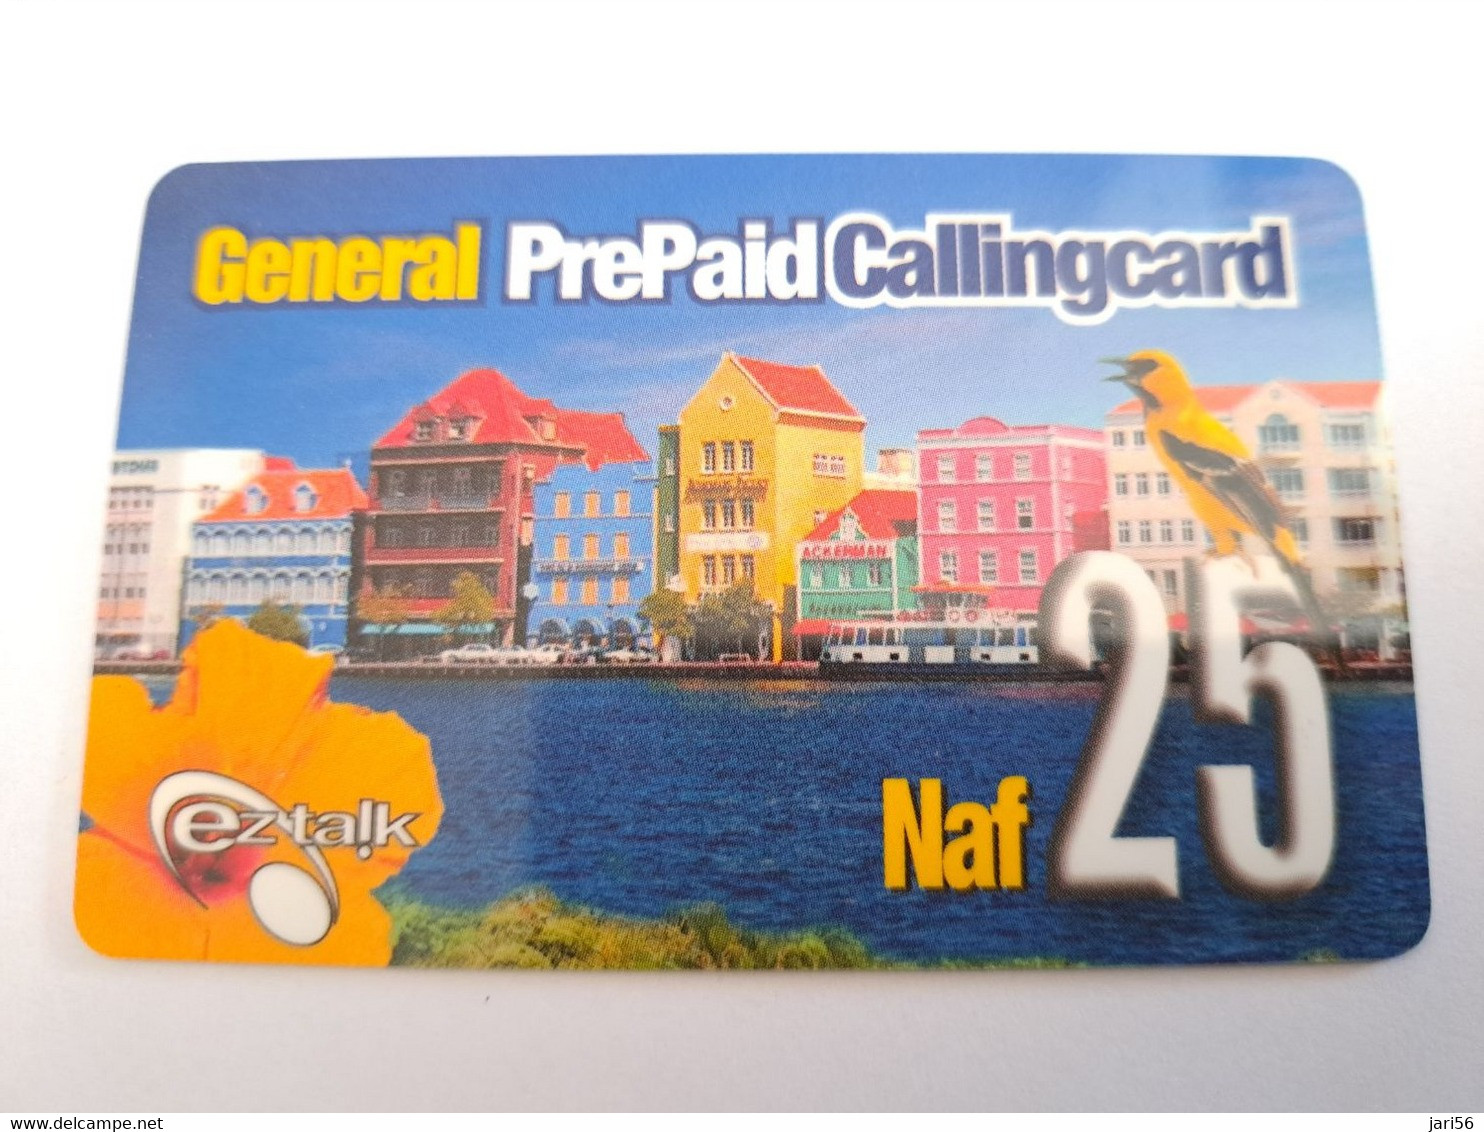 CURACAO NAF 25,-  DUTCH HOUSES IN CURACAO GENERAL PREPAID/ Thick   Card   EZ TALK/ USED  ** 10819** - Antilles (Netherlands)